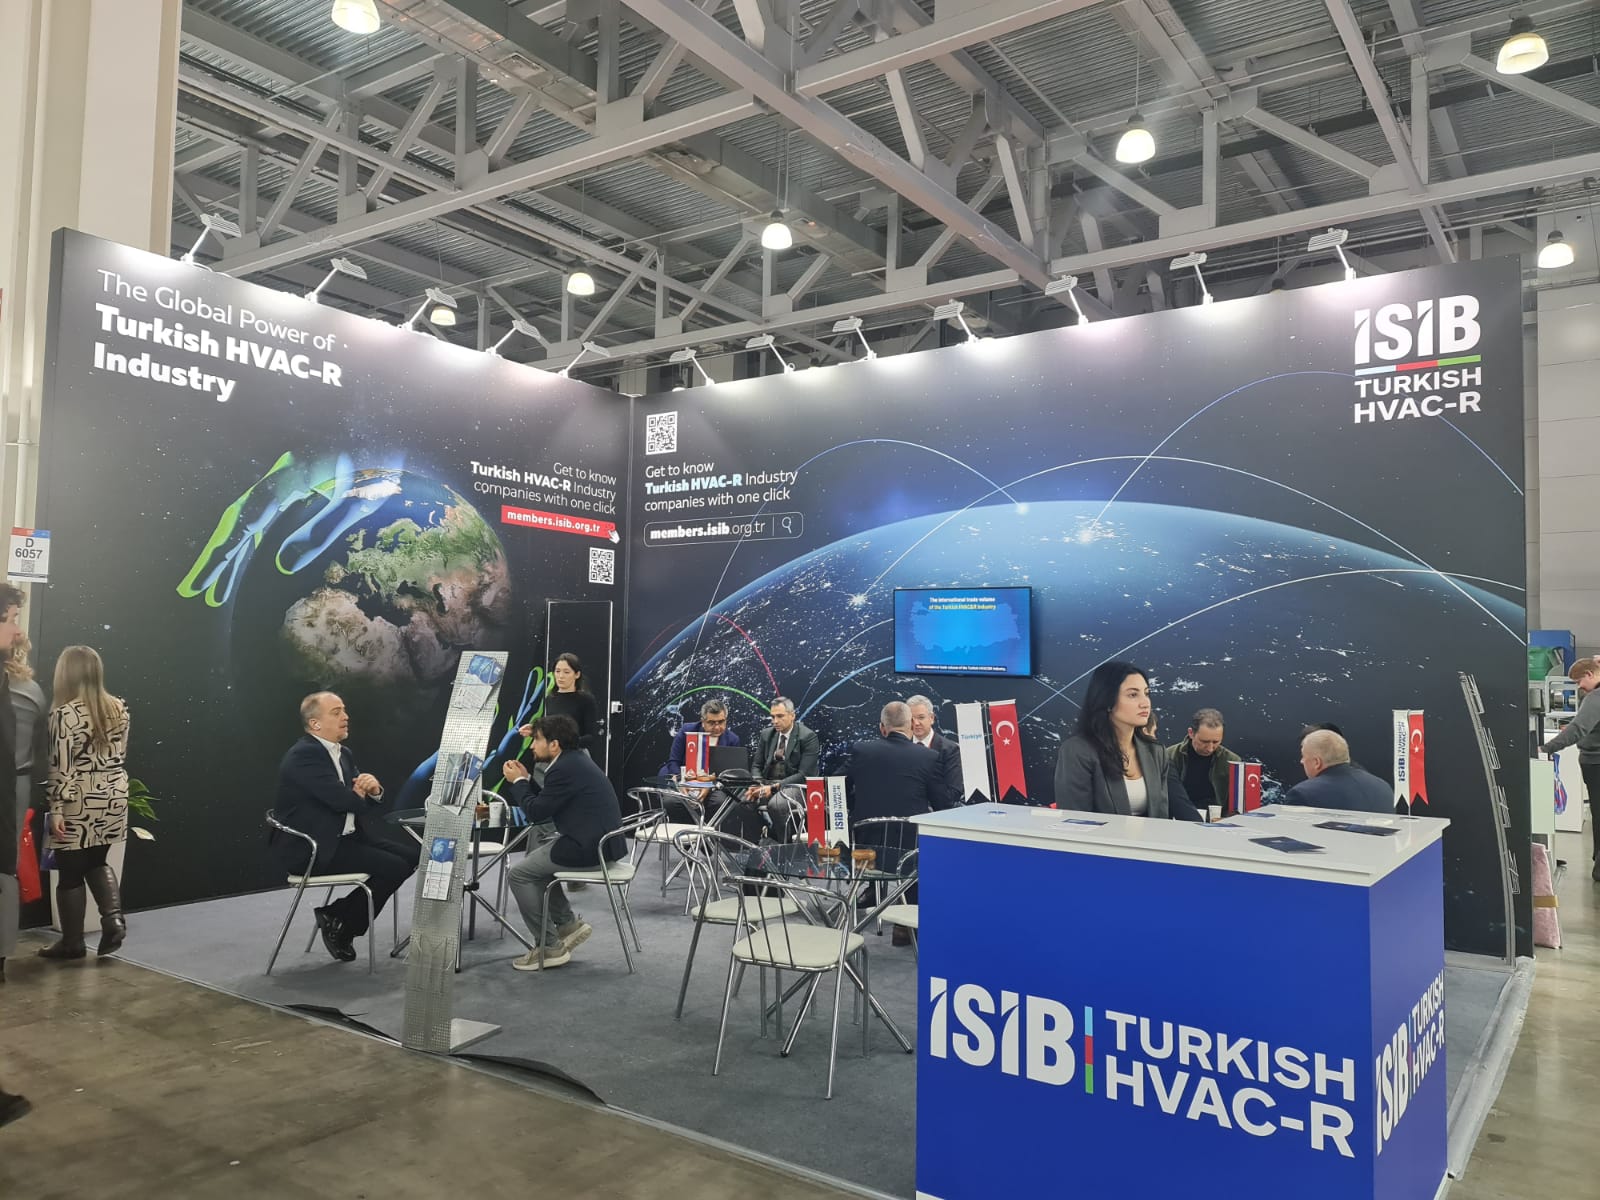 Turkish HVAC-R Industry Participates Significantly in Exhibitions in Russia - 9